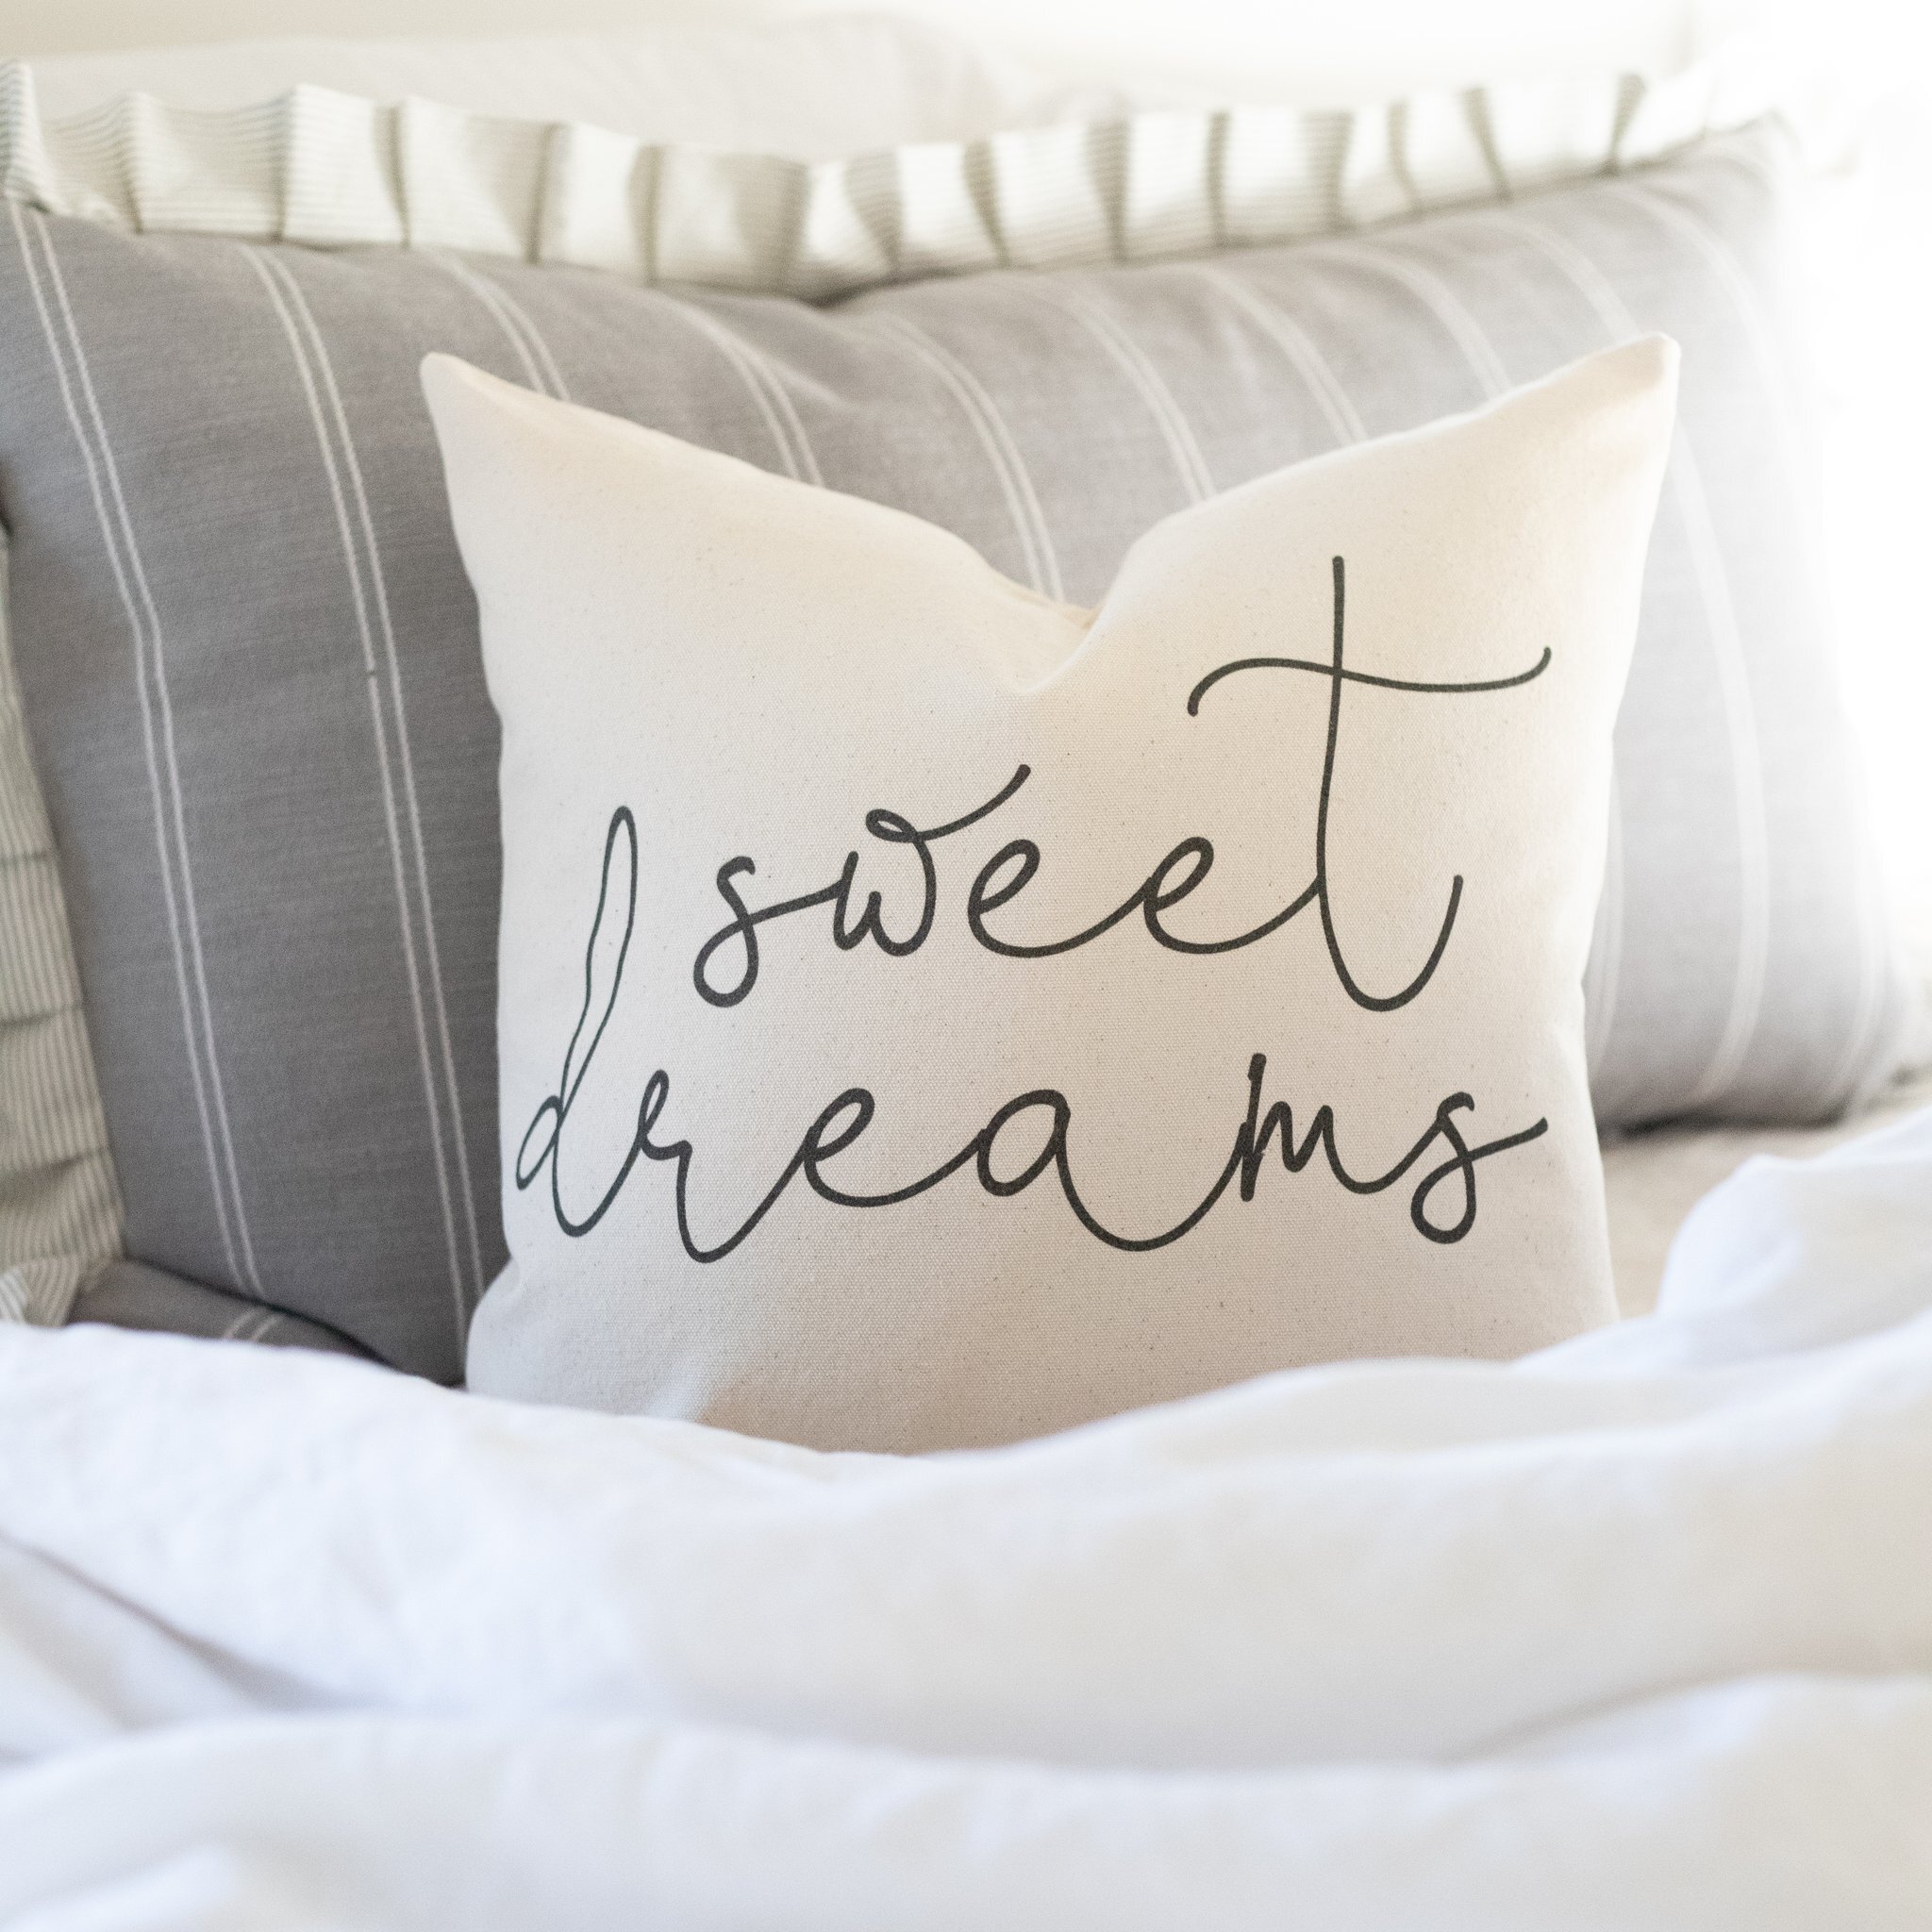 Sweet Dreams Pillow from Rooted + Grounded